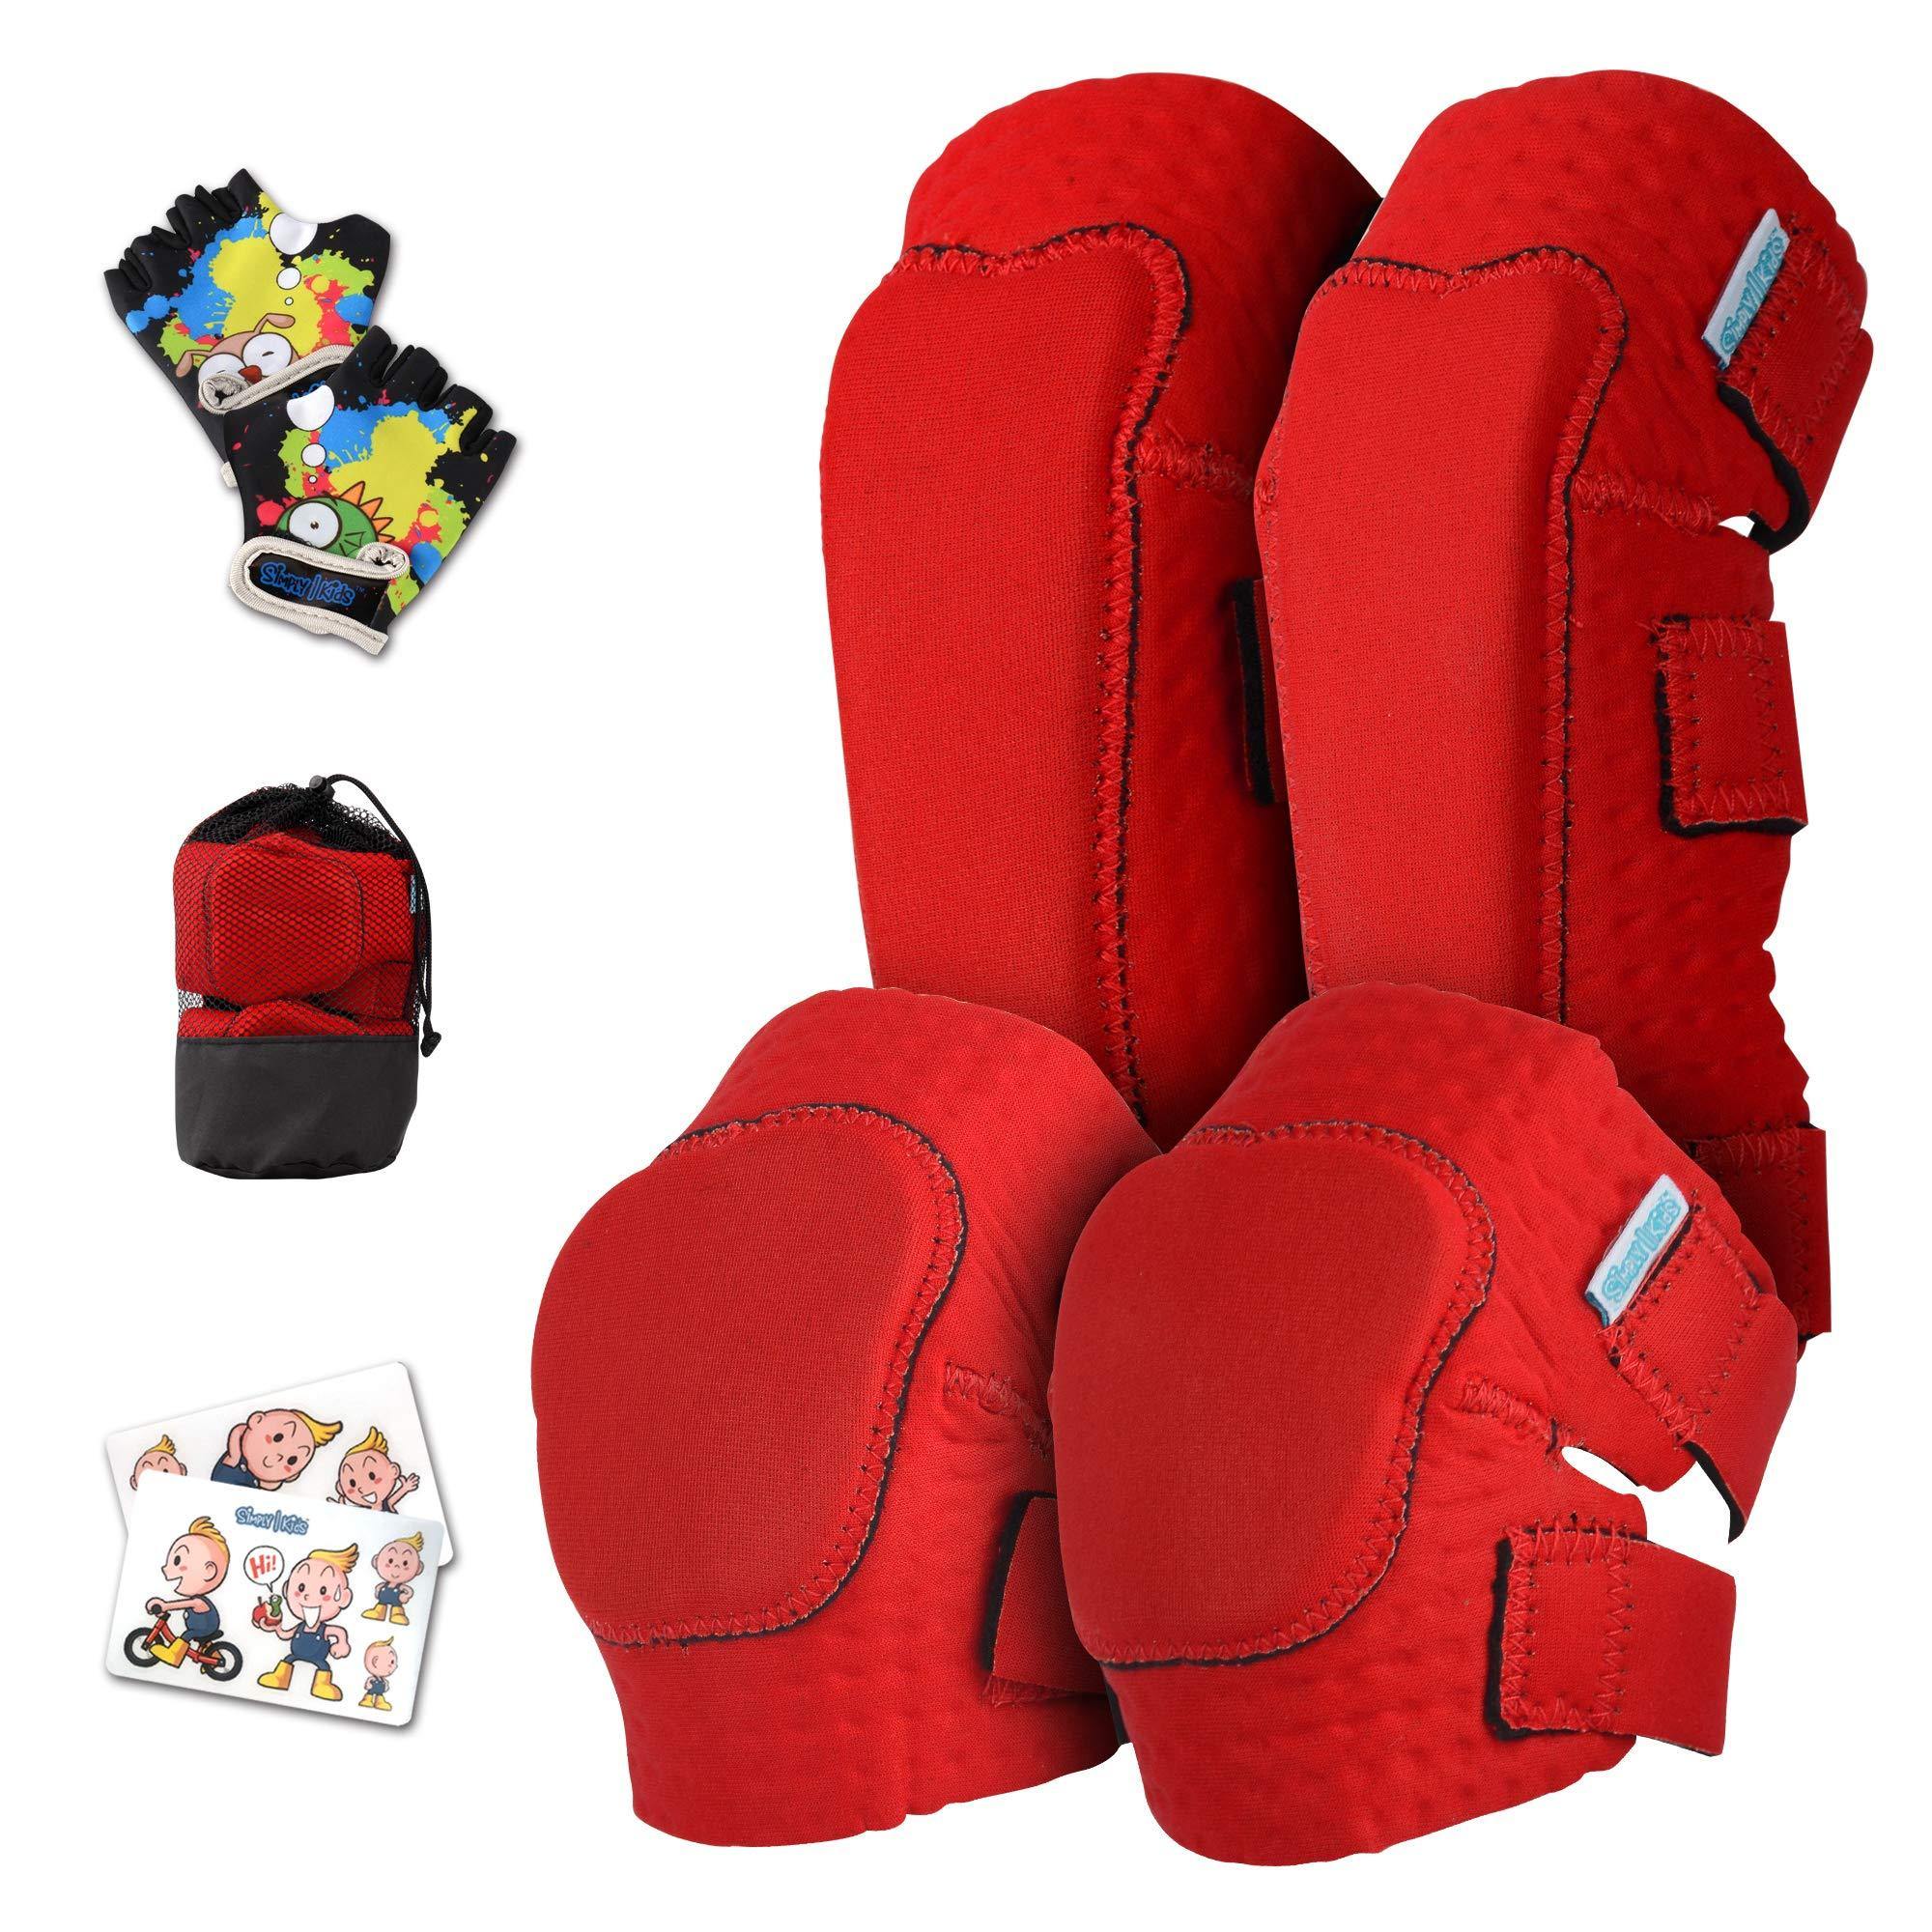 (Pure Red) Innovative Soft Kids Knee and Elbow Pads with Bike Gloves - Simply Kids